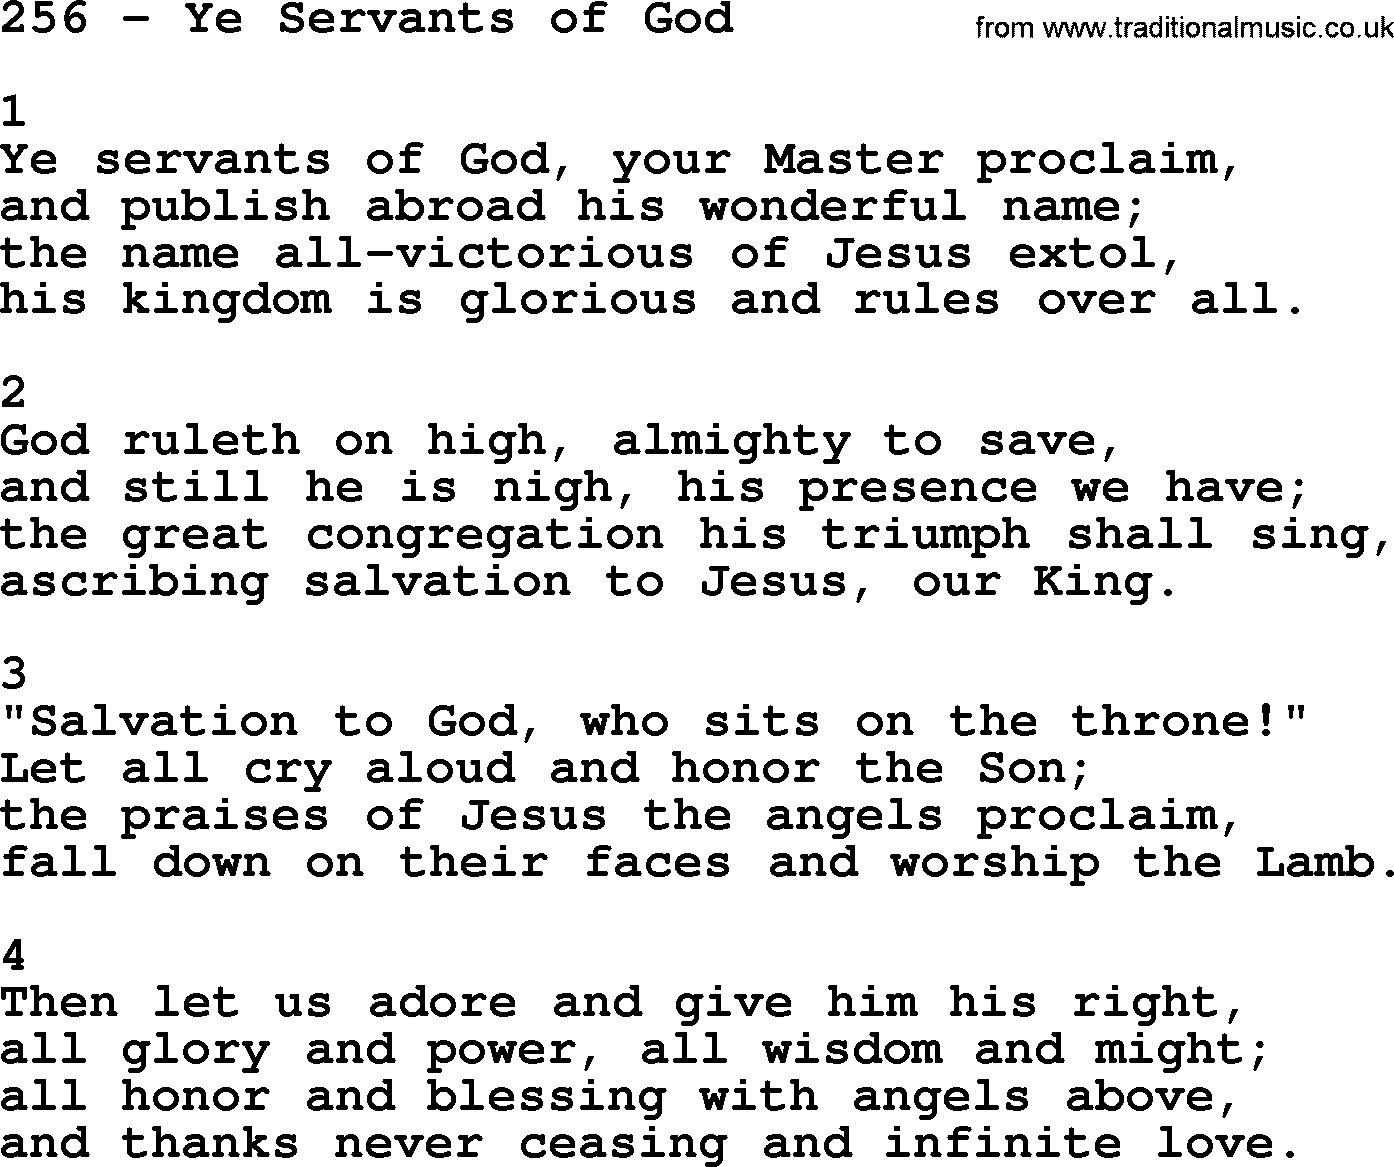 Complete Adventis Hymnal, title: 256-Ye Servants Of God, with lyrics, midi, mp3, powerpoints(PPT) and PDF,